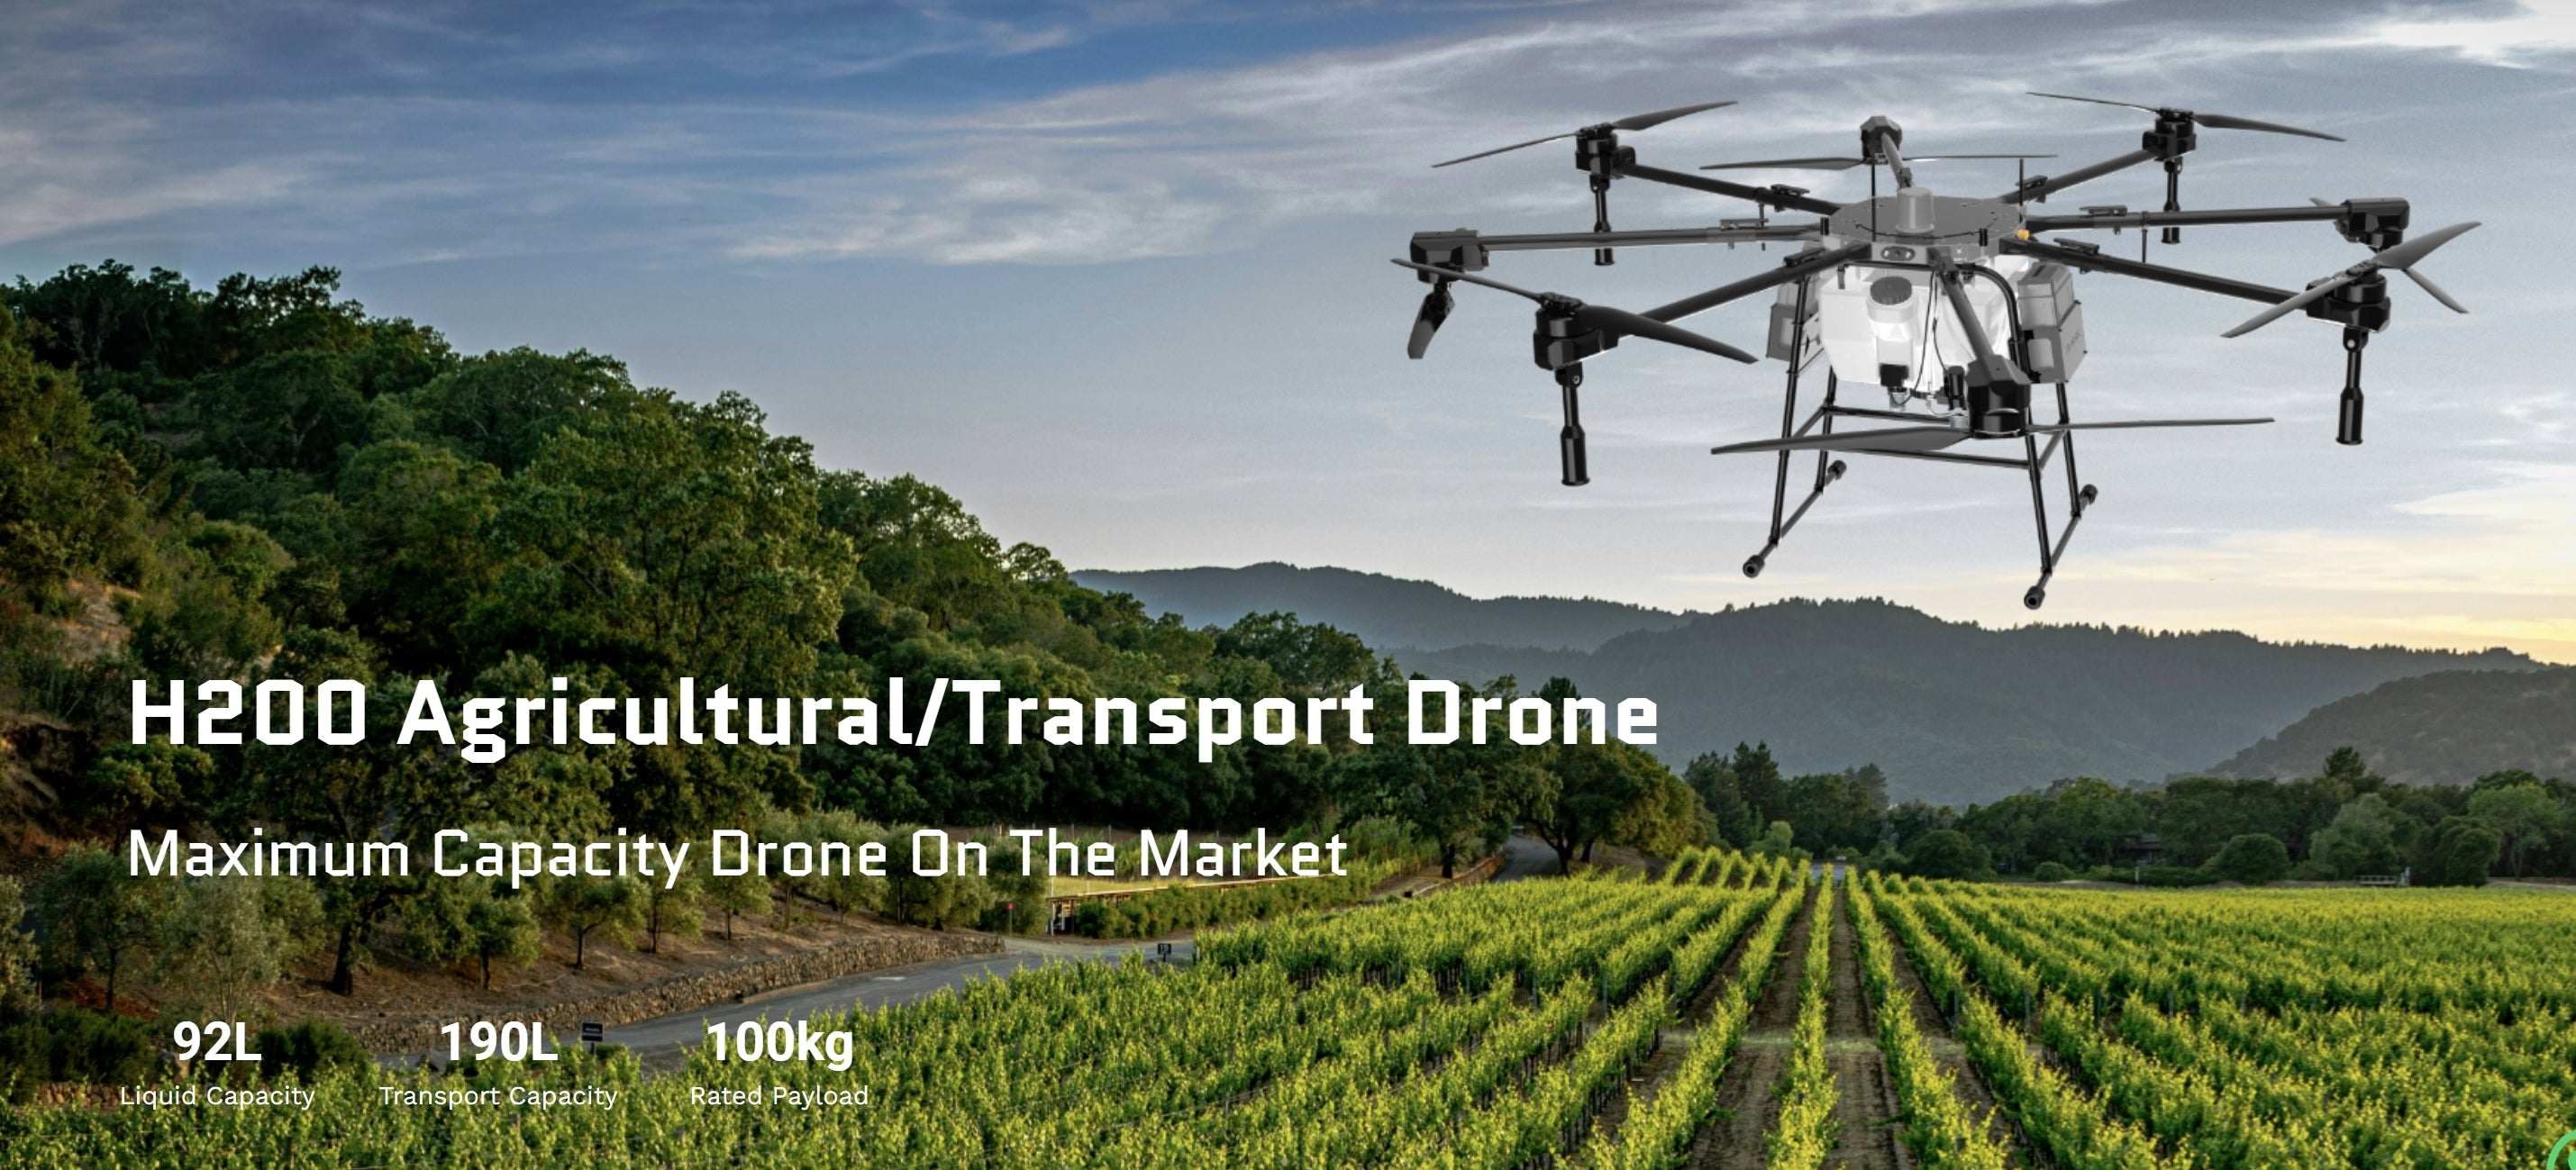 H200 Agricultural / Transport Drone, H2O0 Agricultural/Transport Drone Maximum Capacity Drone On The